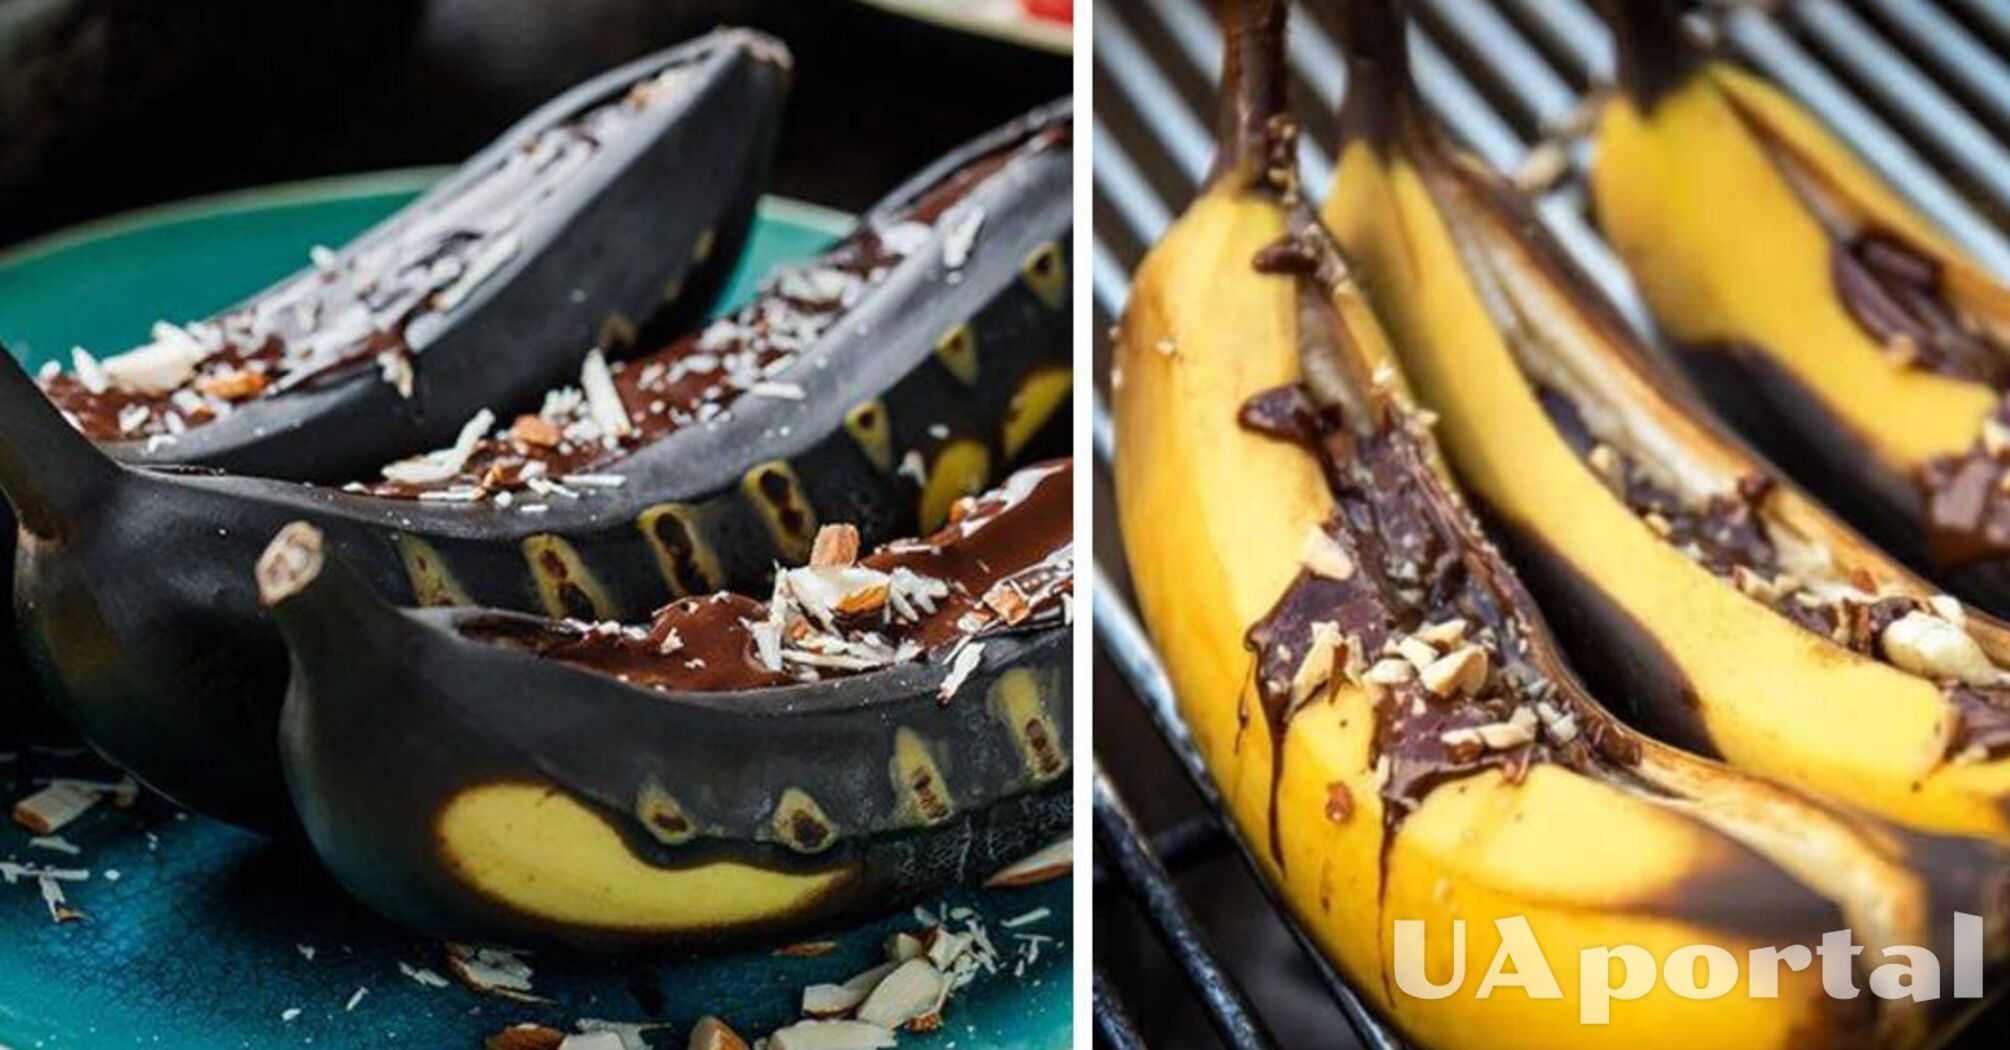 Children will be delighted: Yevhen Klopotenko's recipe for grilled bananas with chocolate 